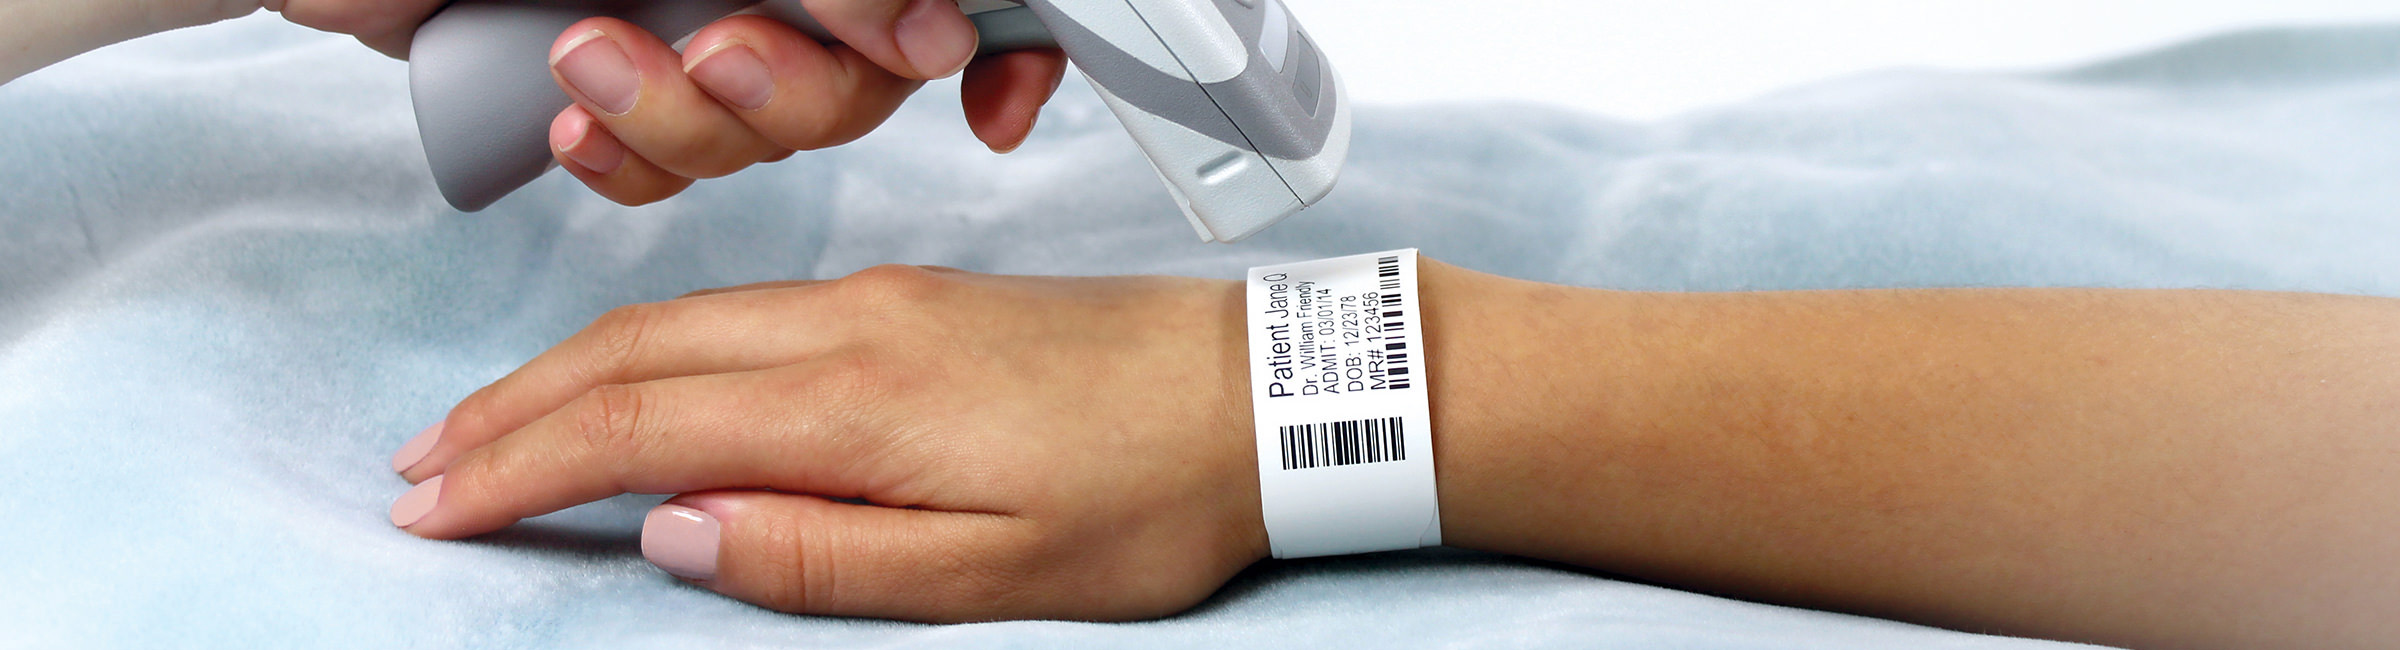 Page 4 | Printable Thermal Wristbands for Patient Identification – PDC